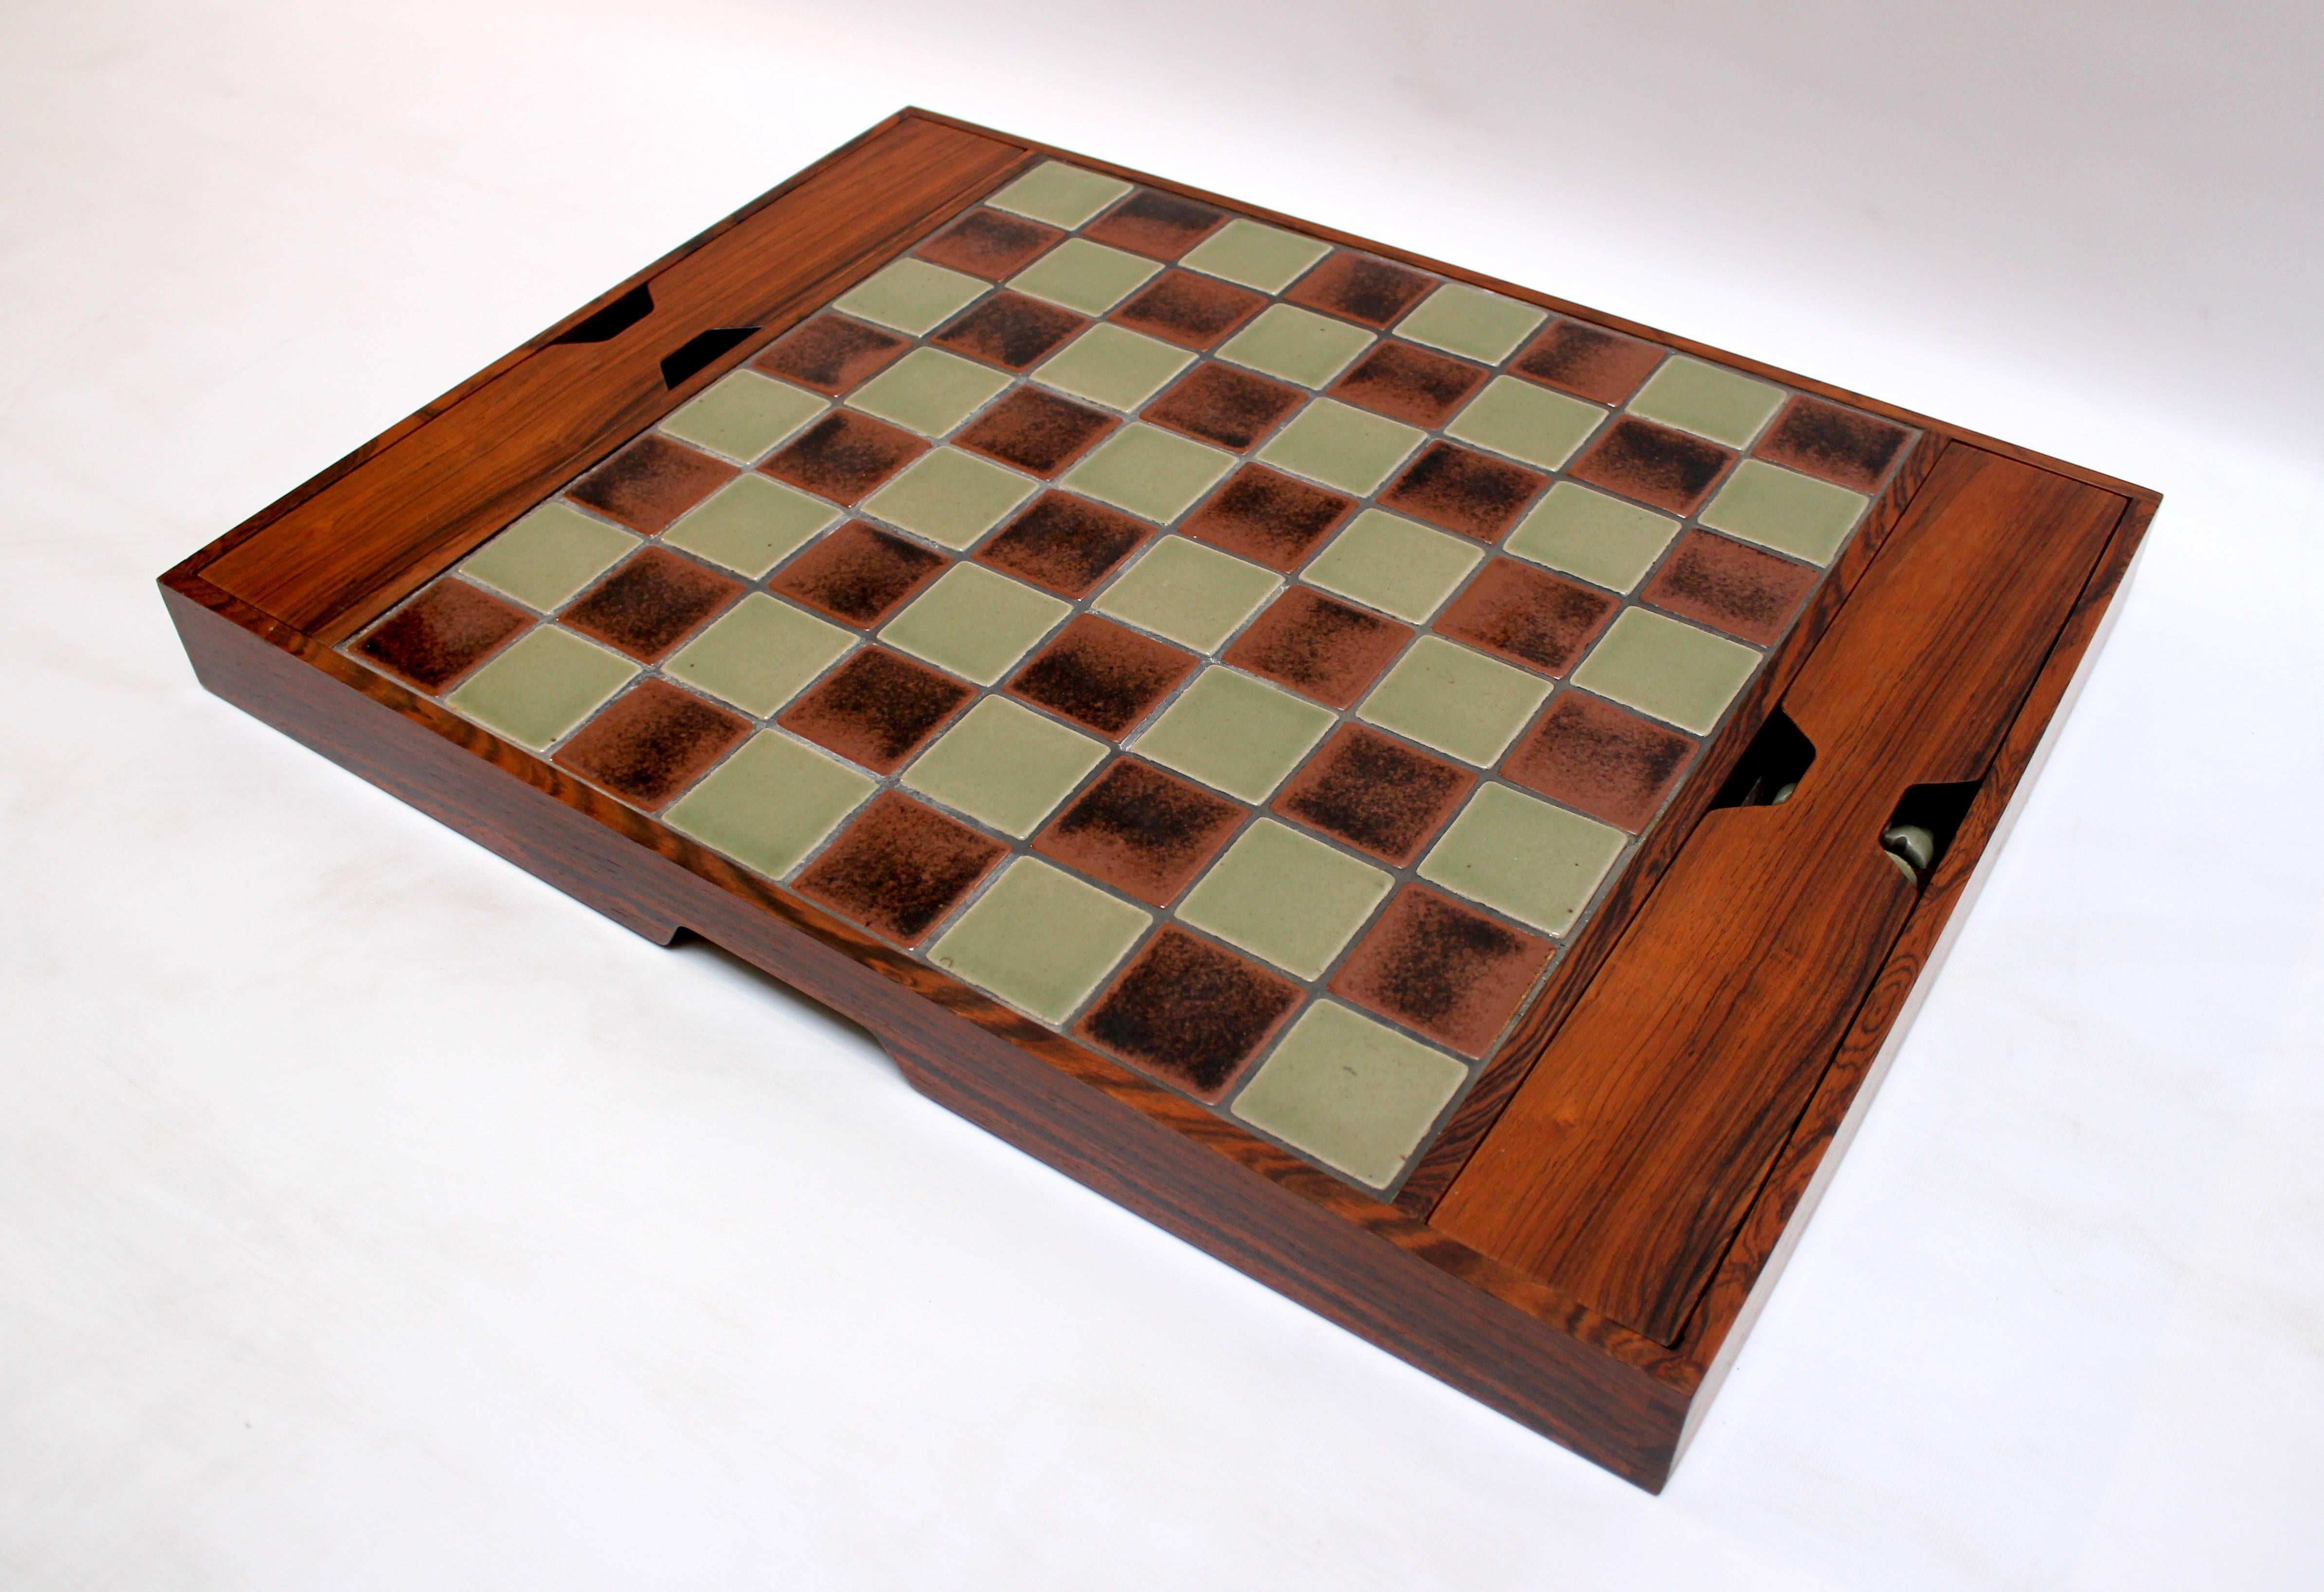 1960s Danish rosewood and pottery chess set. Game board and pieces are pottery, and pieces store in felt-lined trays in the rosewood-cased board.